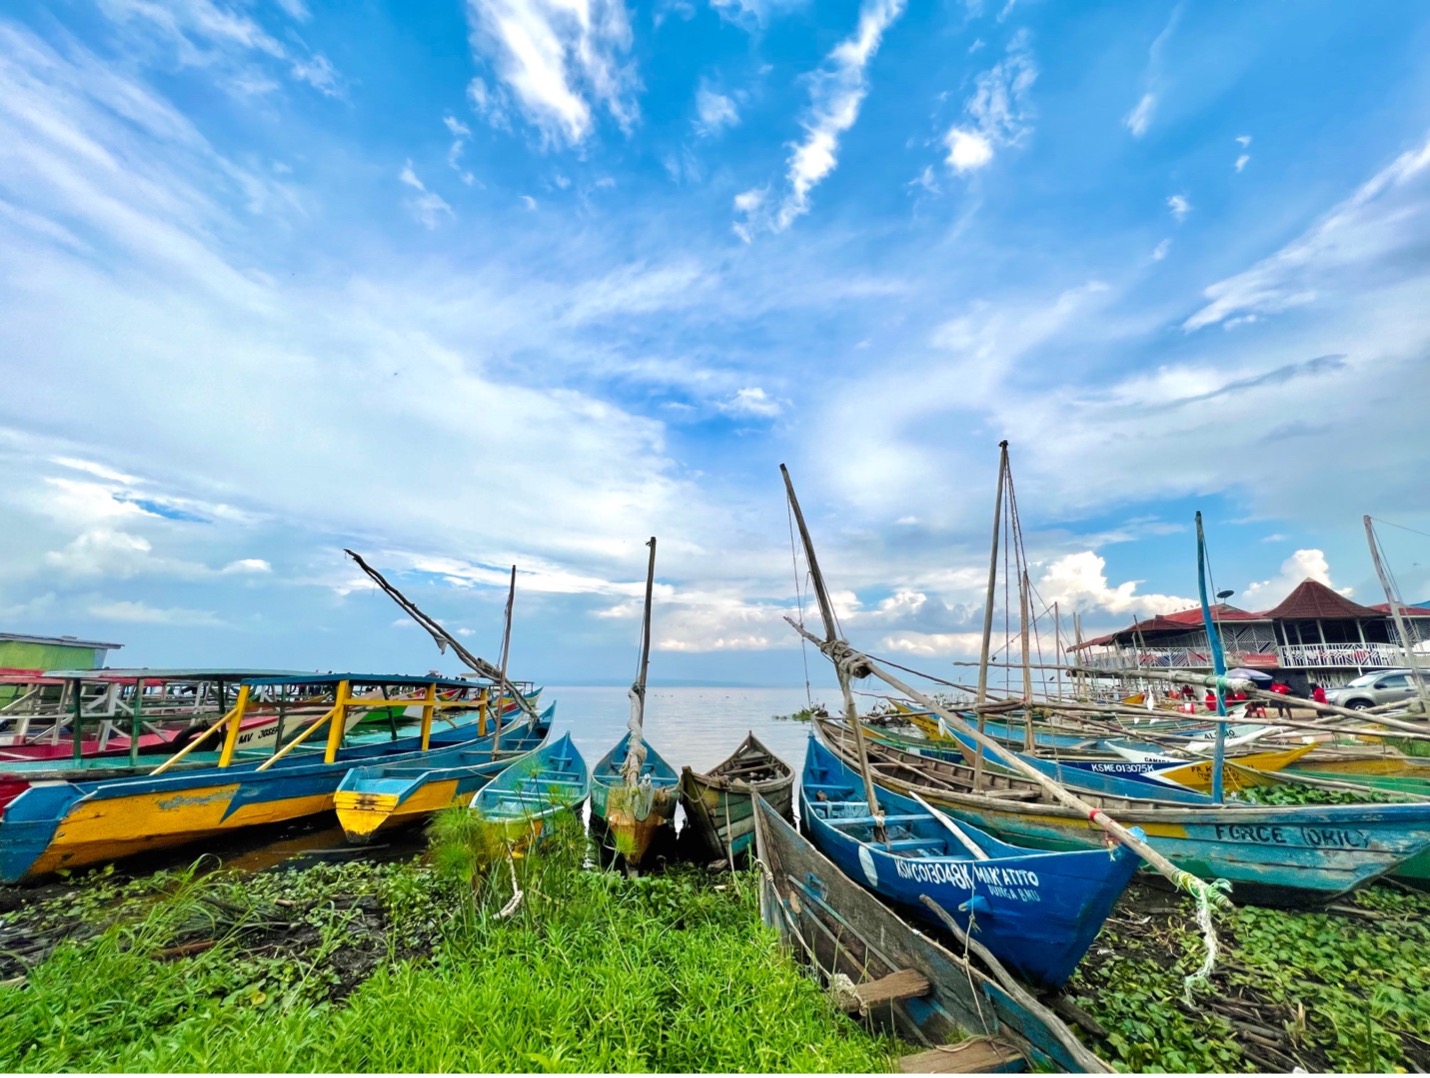 Vibrant fishing boats docked at Dunga Beach, a bustling landing site for fishers.